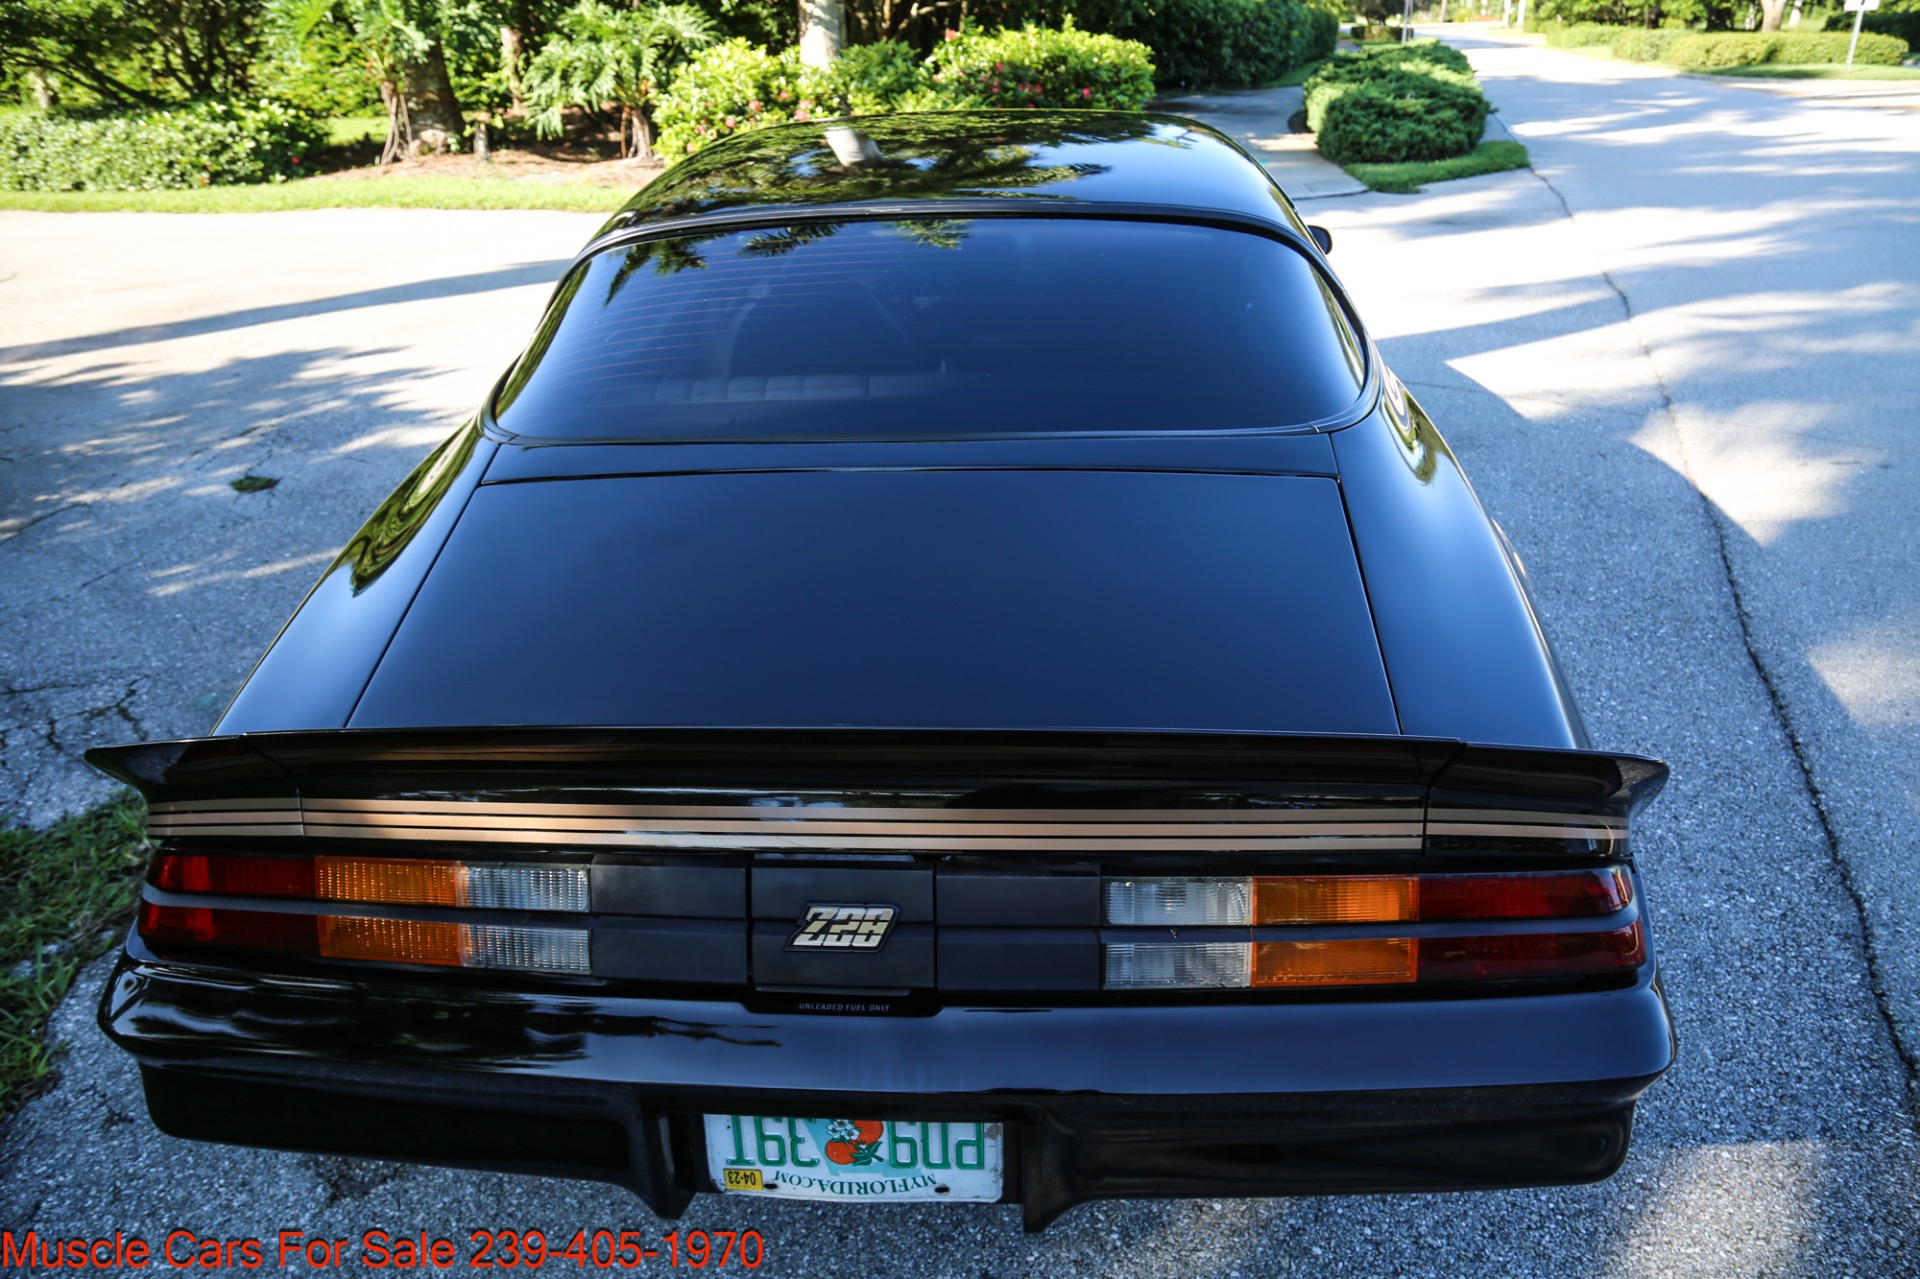 Used 1980 Chevrolet Camaro Z28 14454 Miles for sale Sold at Muscle Cars for Sale Inc. in Fort Myers FL 33912 5